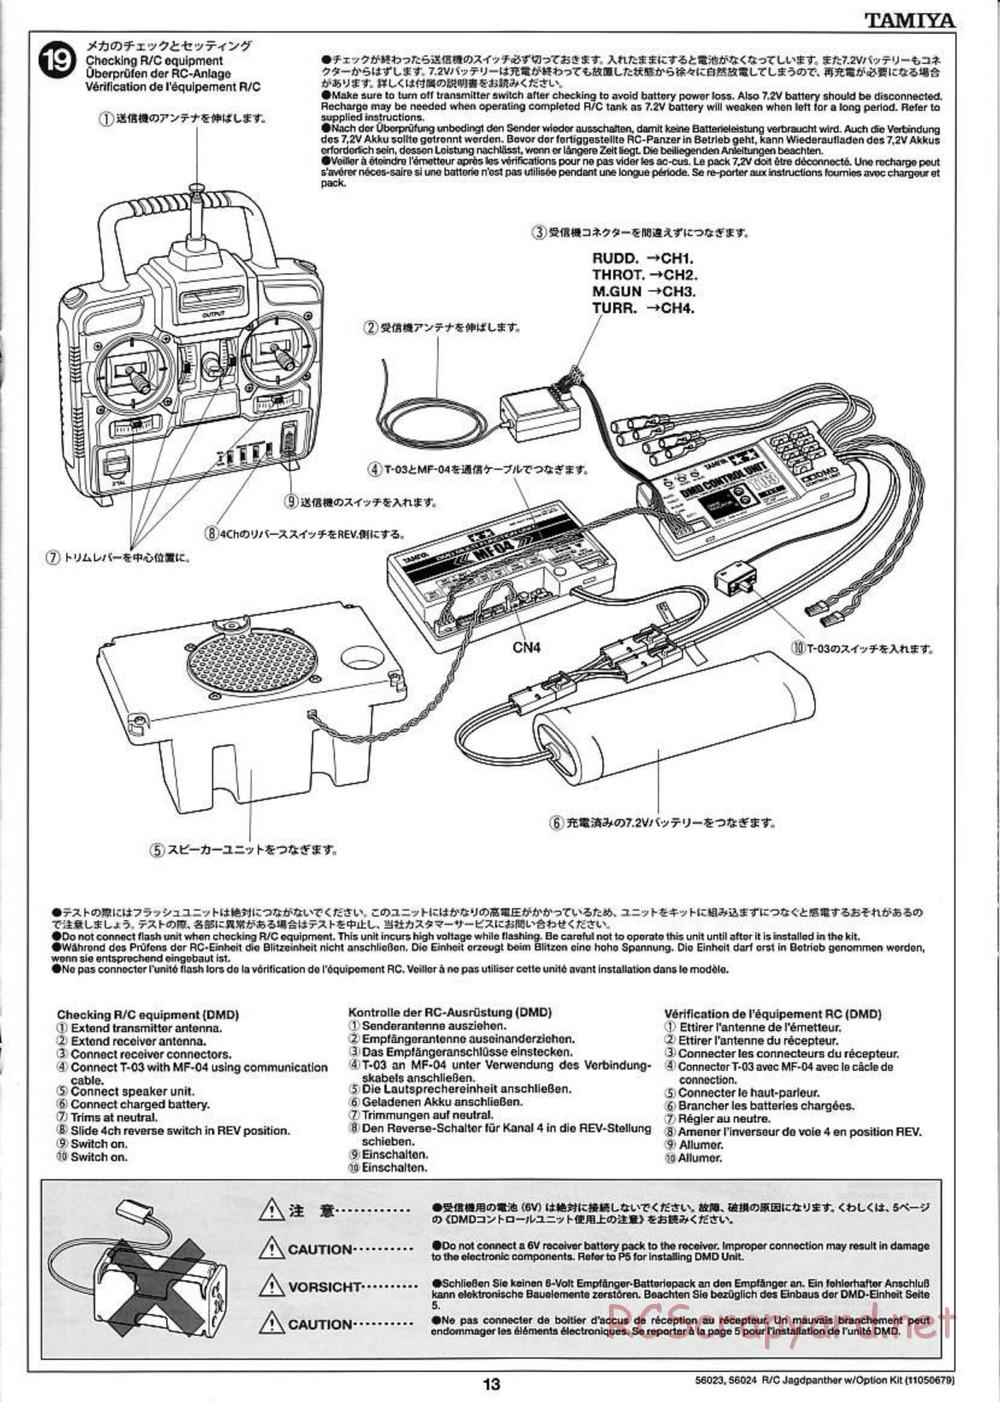 Tamiya - Jagdpanther - 1/16 Scale Chassis - Manual - Page 13